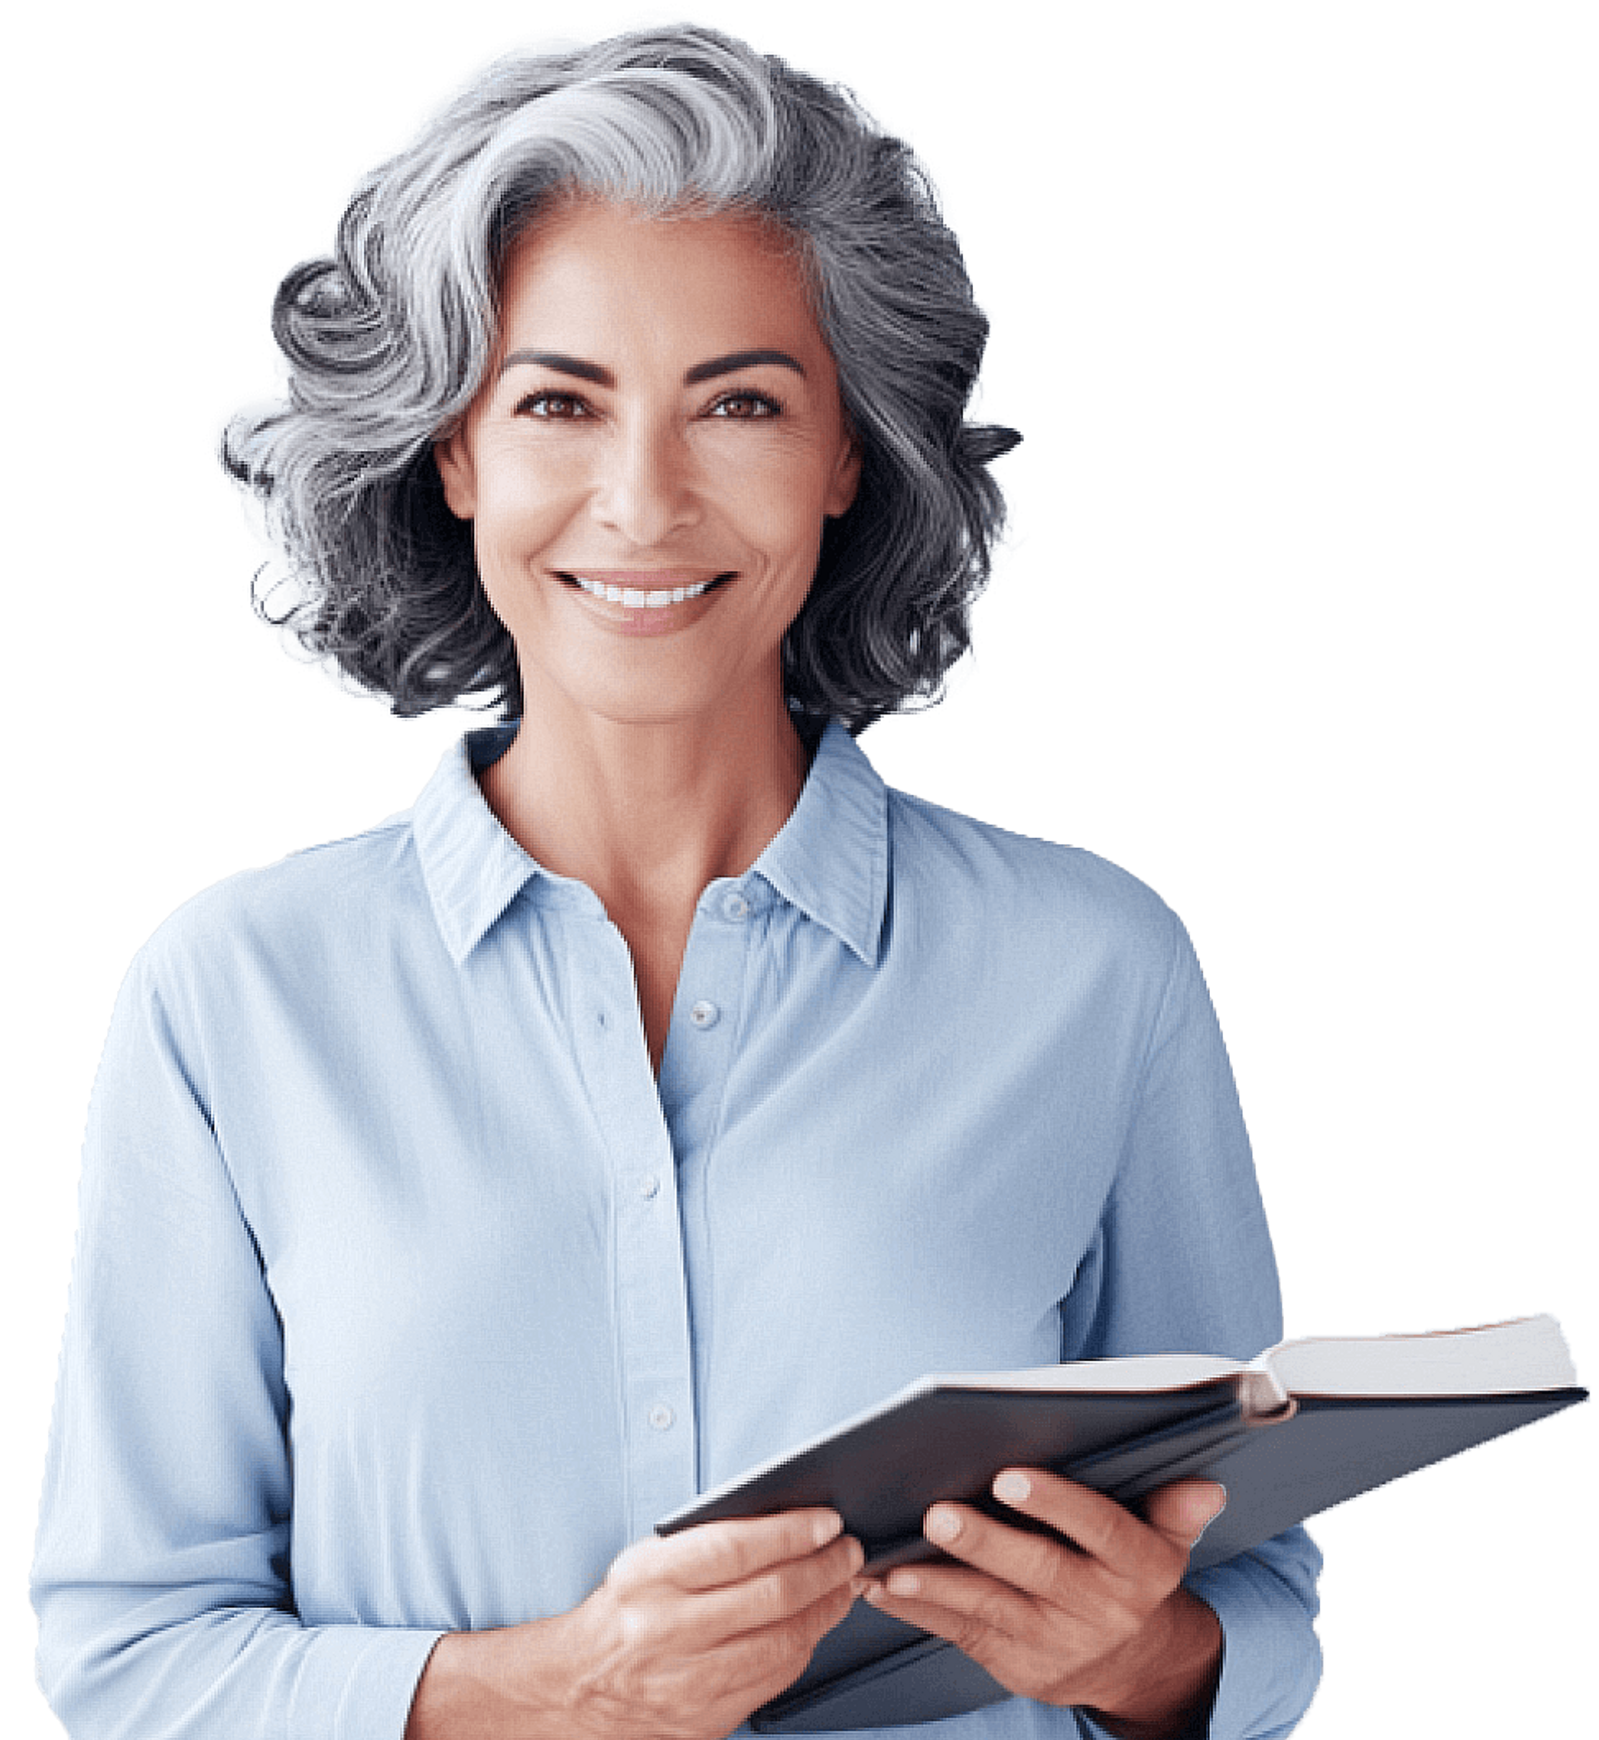 Beautiful grey haired woman in a blue button up shirt smiling holding a book.